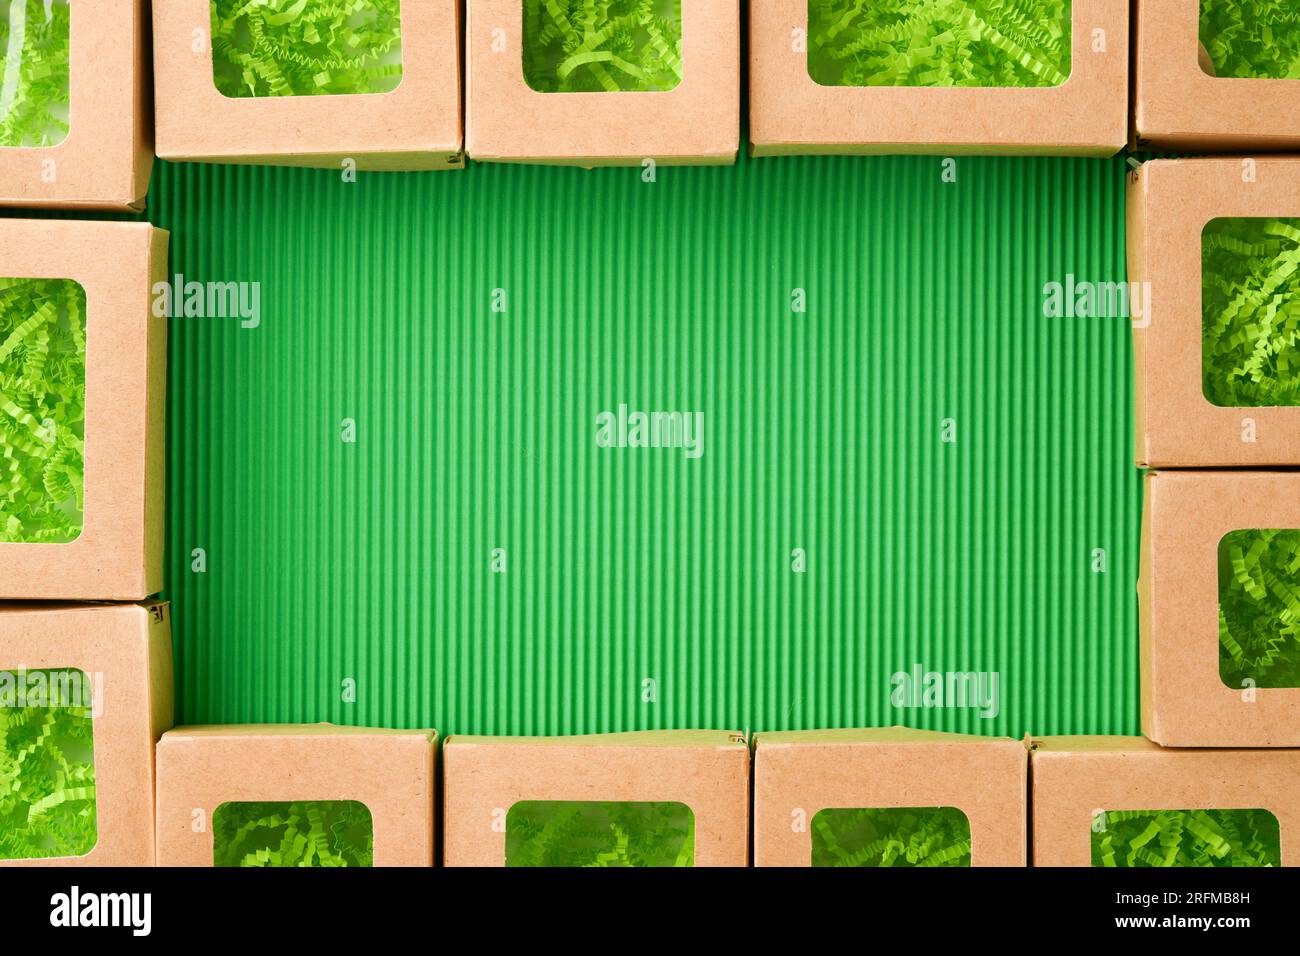 Green Friday backgrounds mock up. Sale Tag on green background. Paper shopping boxes and green tag. Environmentally friendly shopping idea, useful thi Stock Photo